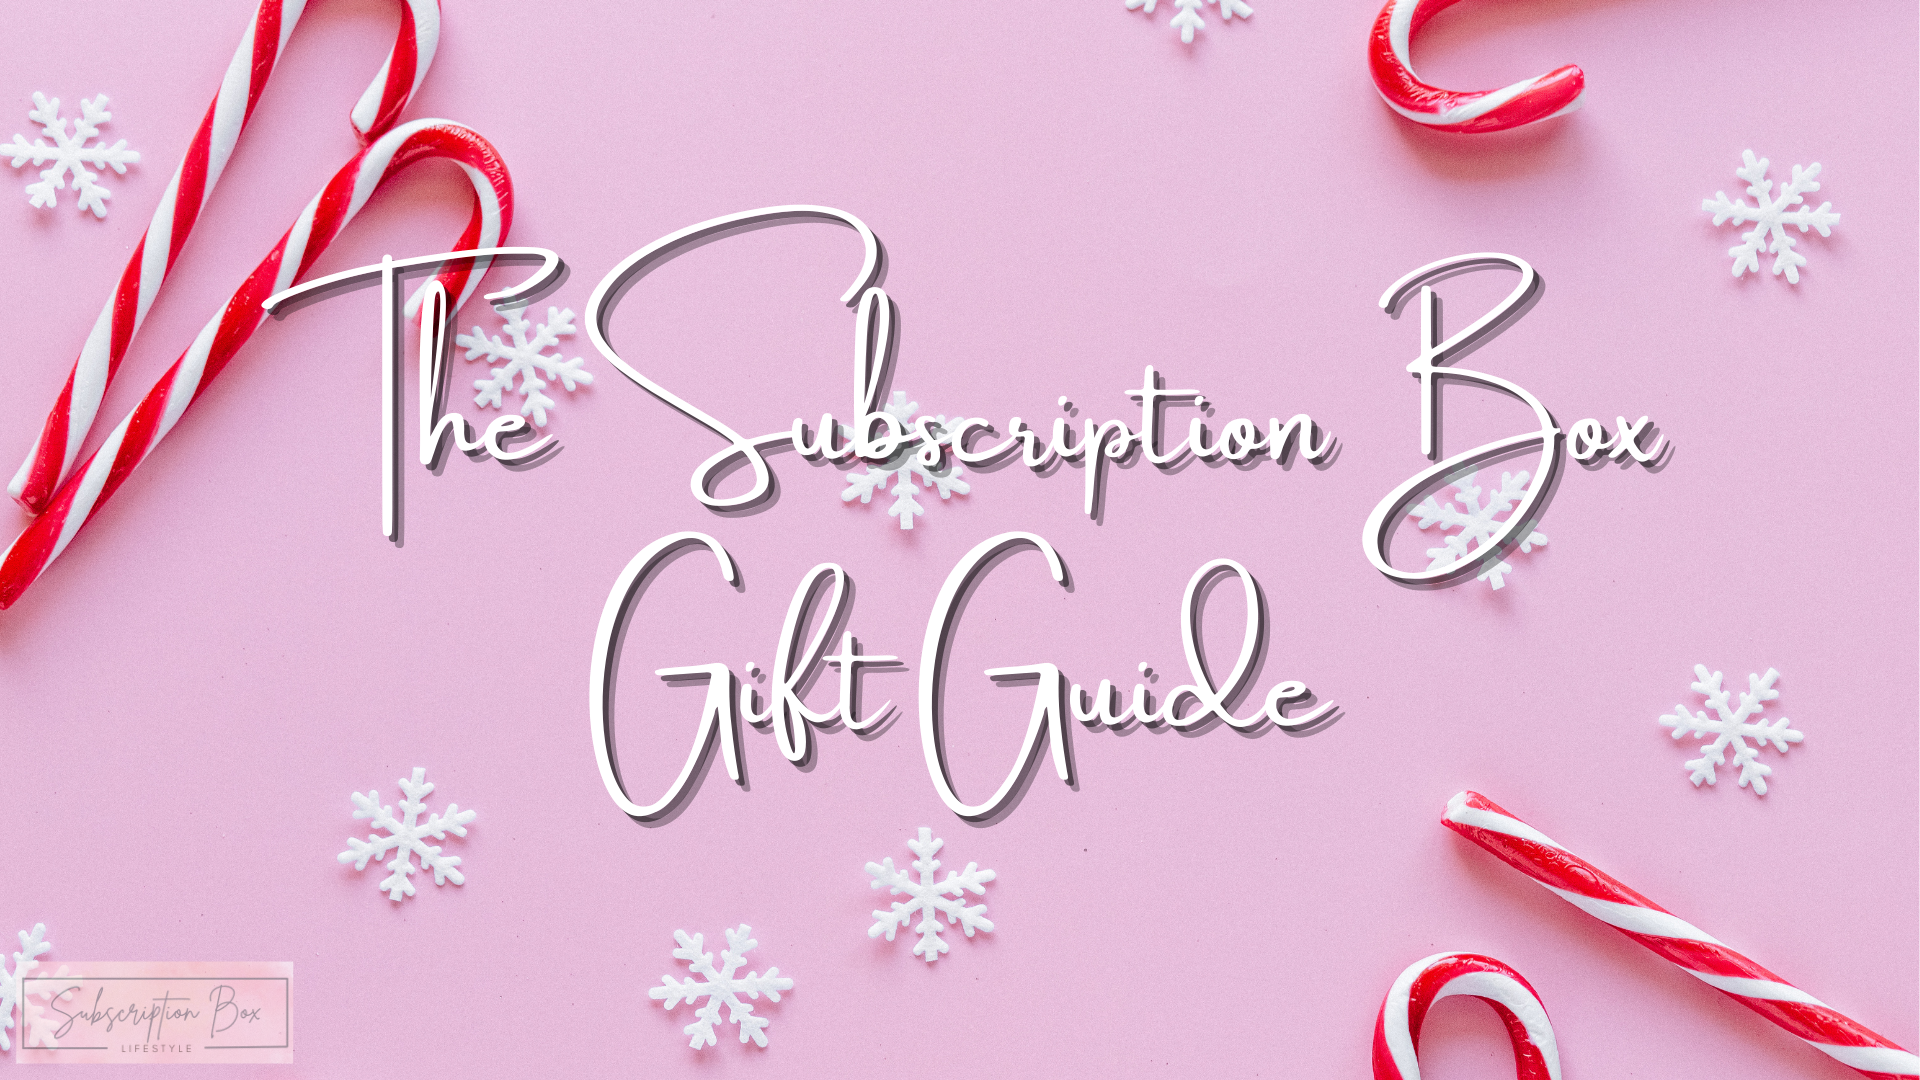 Holiday Gift Guide 2023